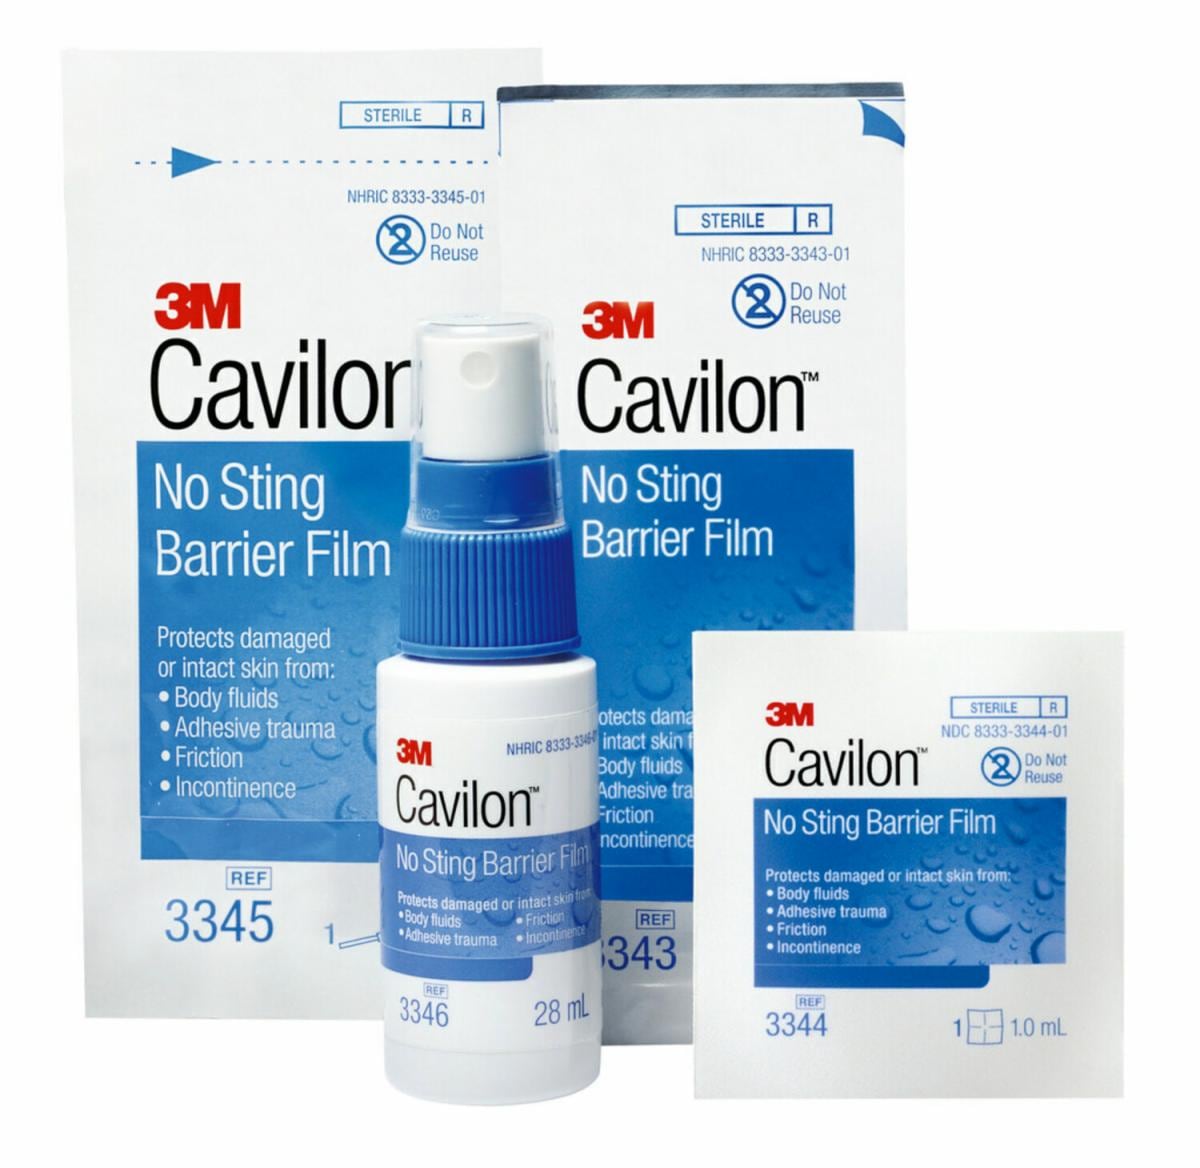 Cavilon No Sting Barrier Film by 3M for Maximum Skin Protection